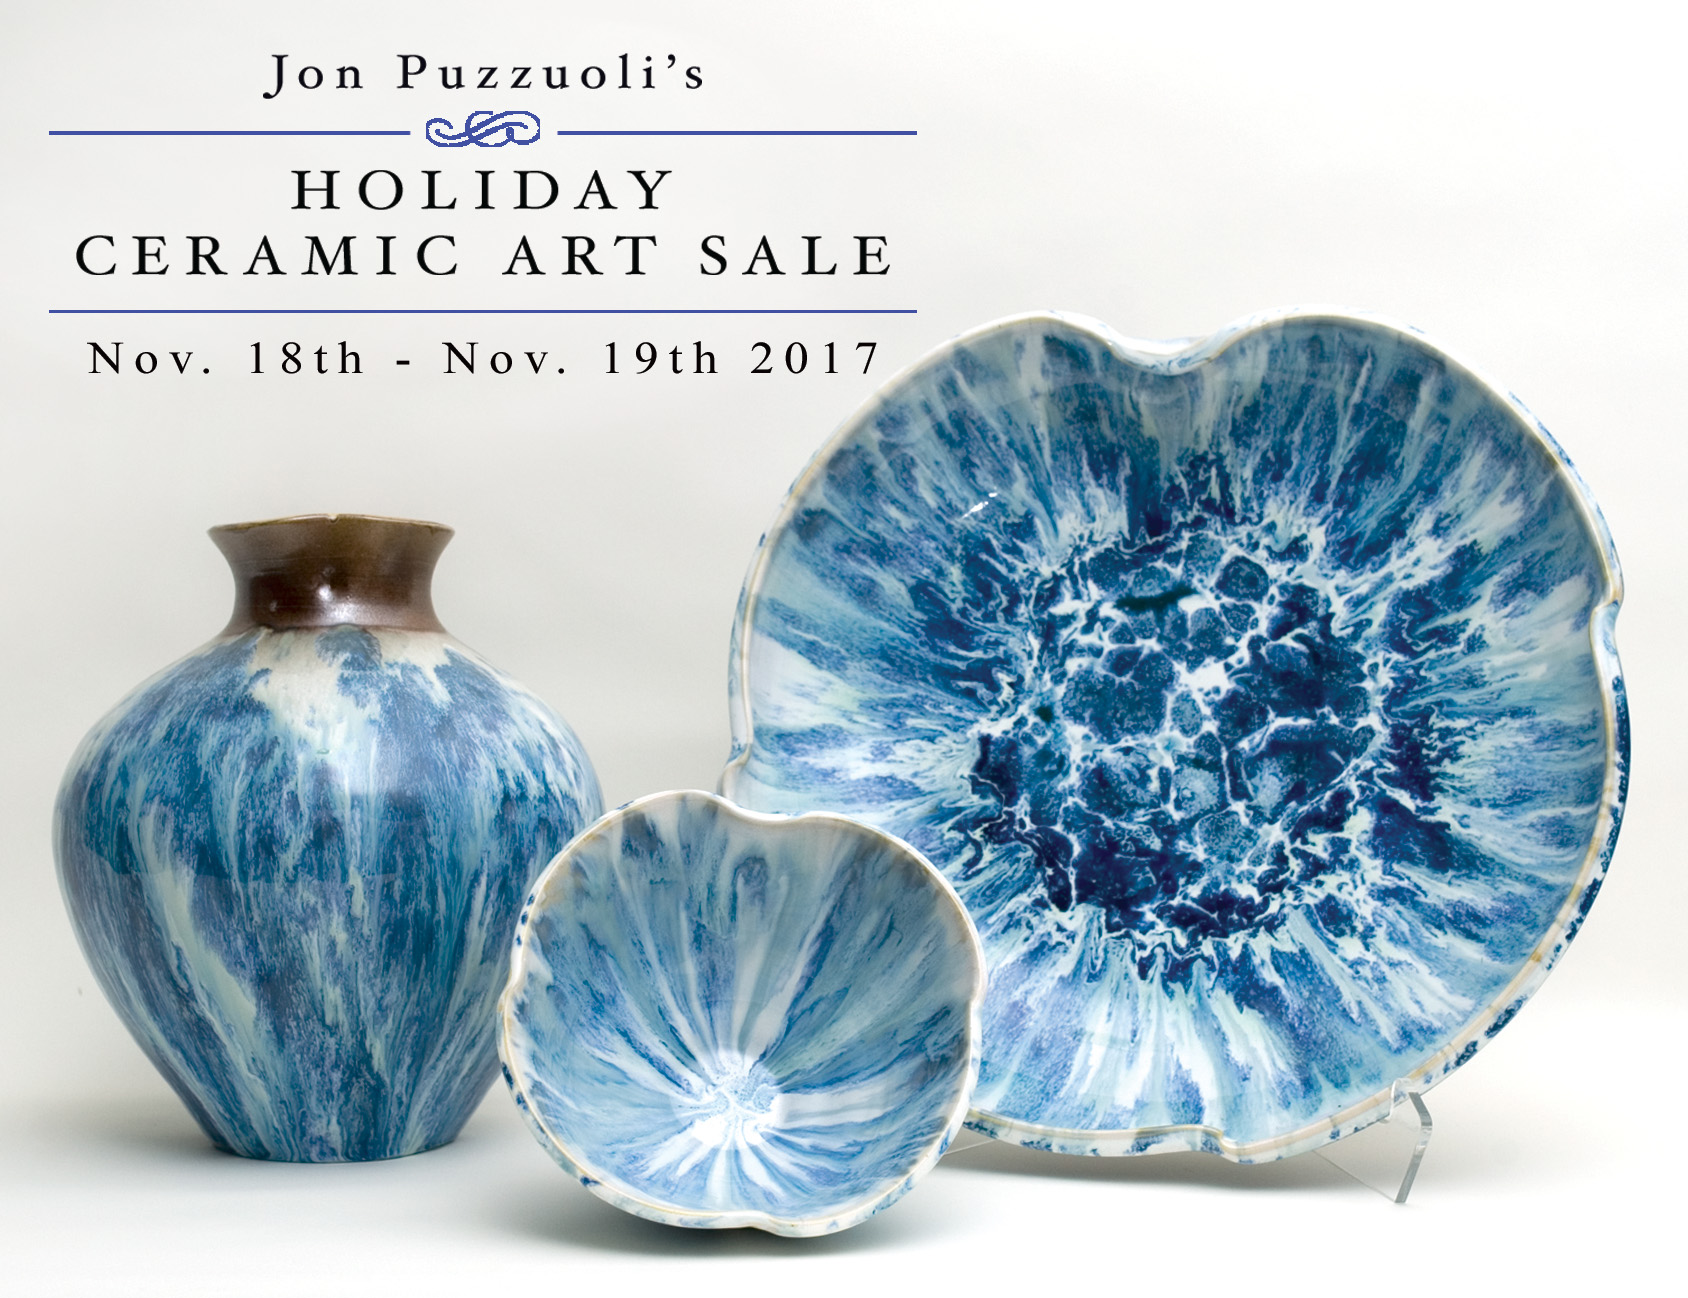 Puzz Pottery - Elegant Pottery & Classes for all